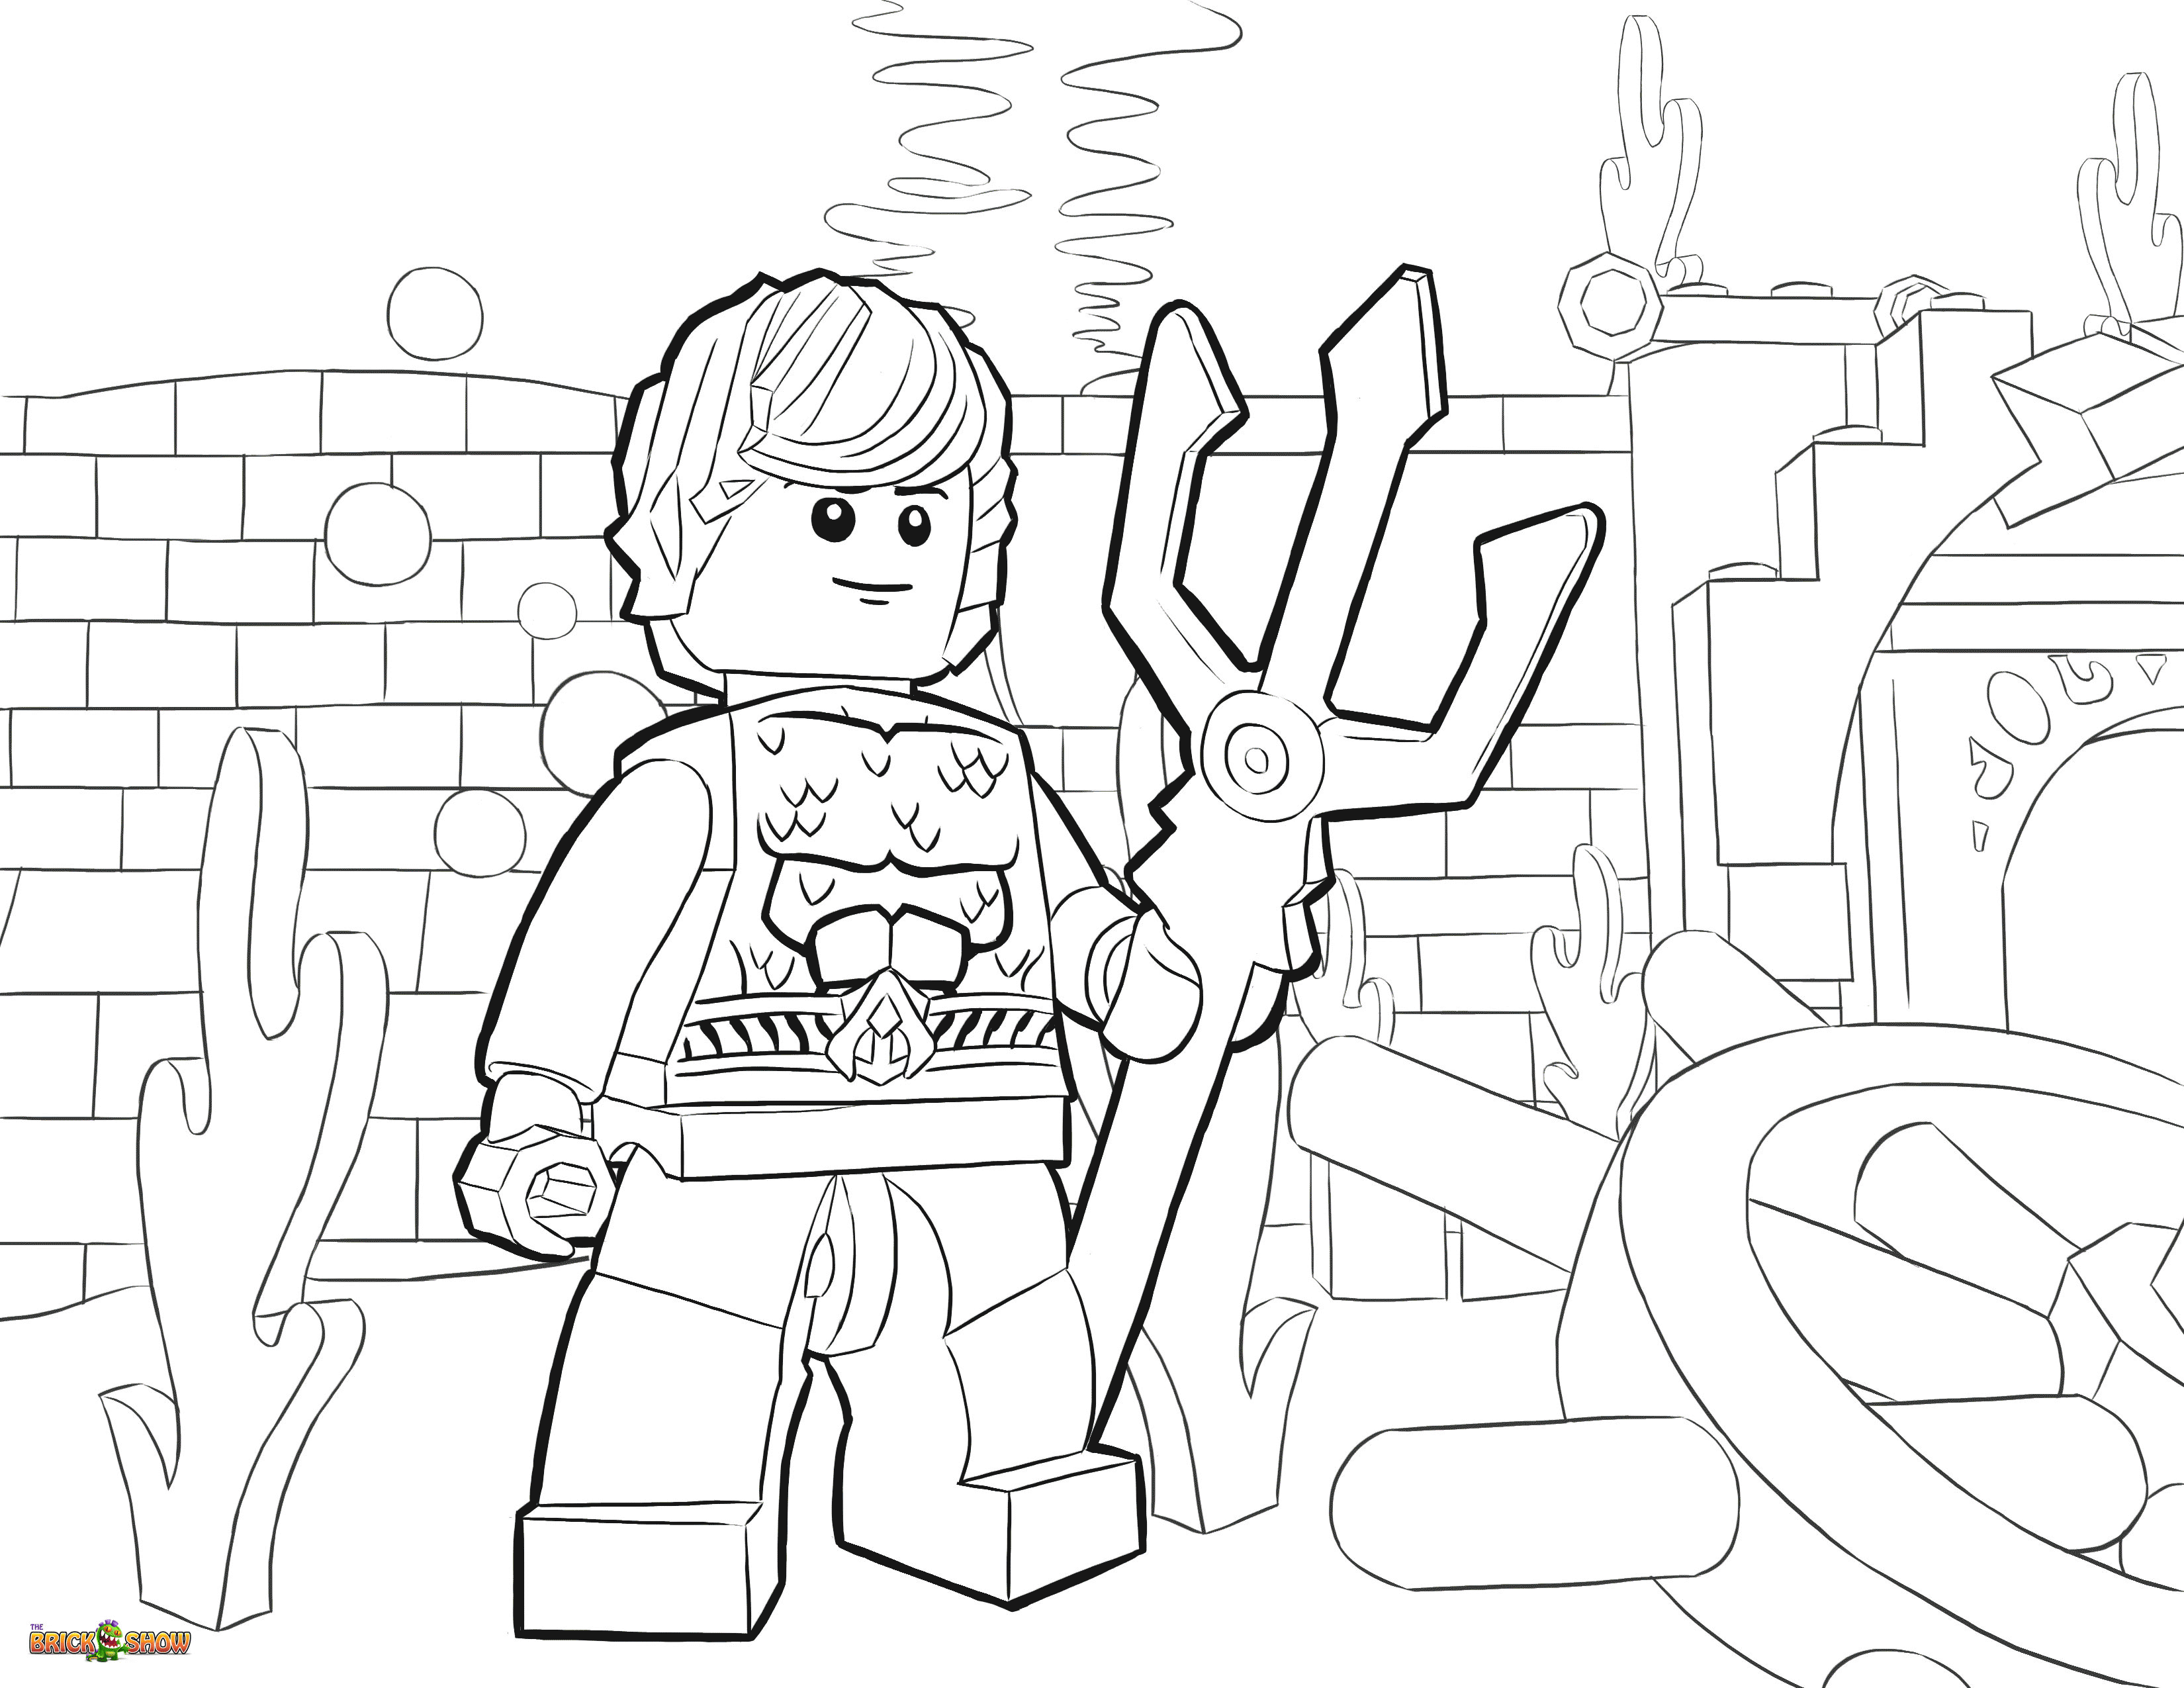 lego superheroes coloring pages avengers lego coloring pages coloring home pages lego superheroes coloring 